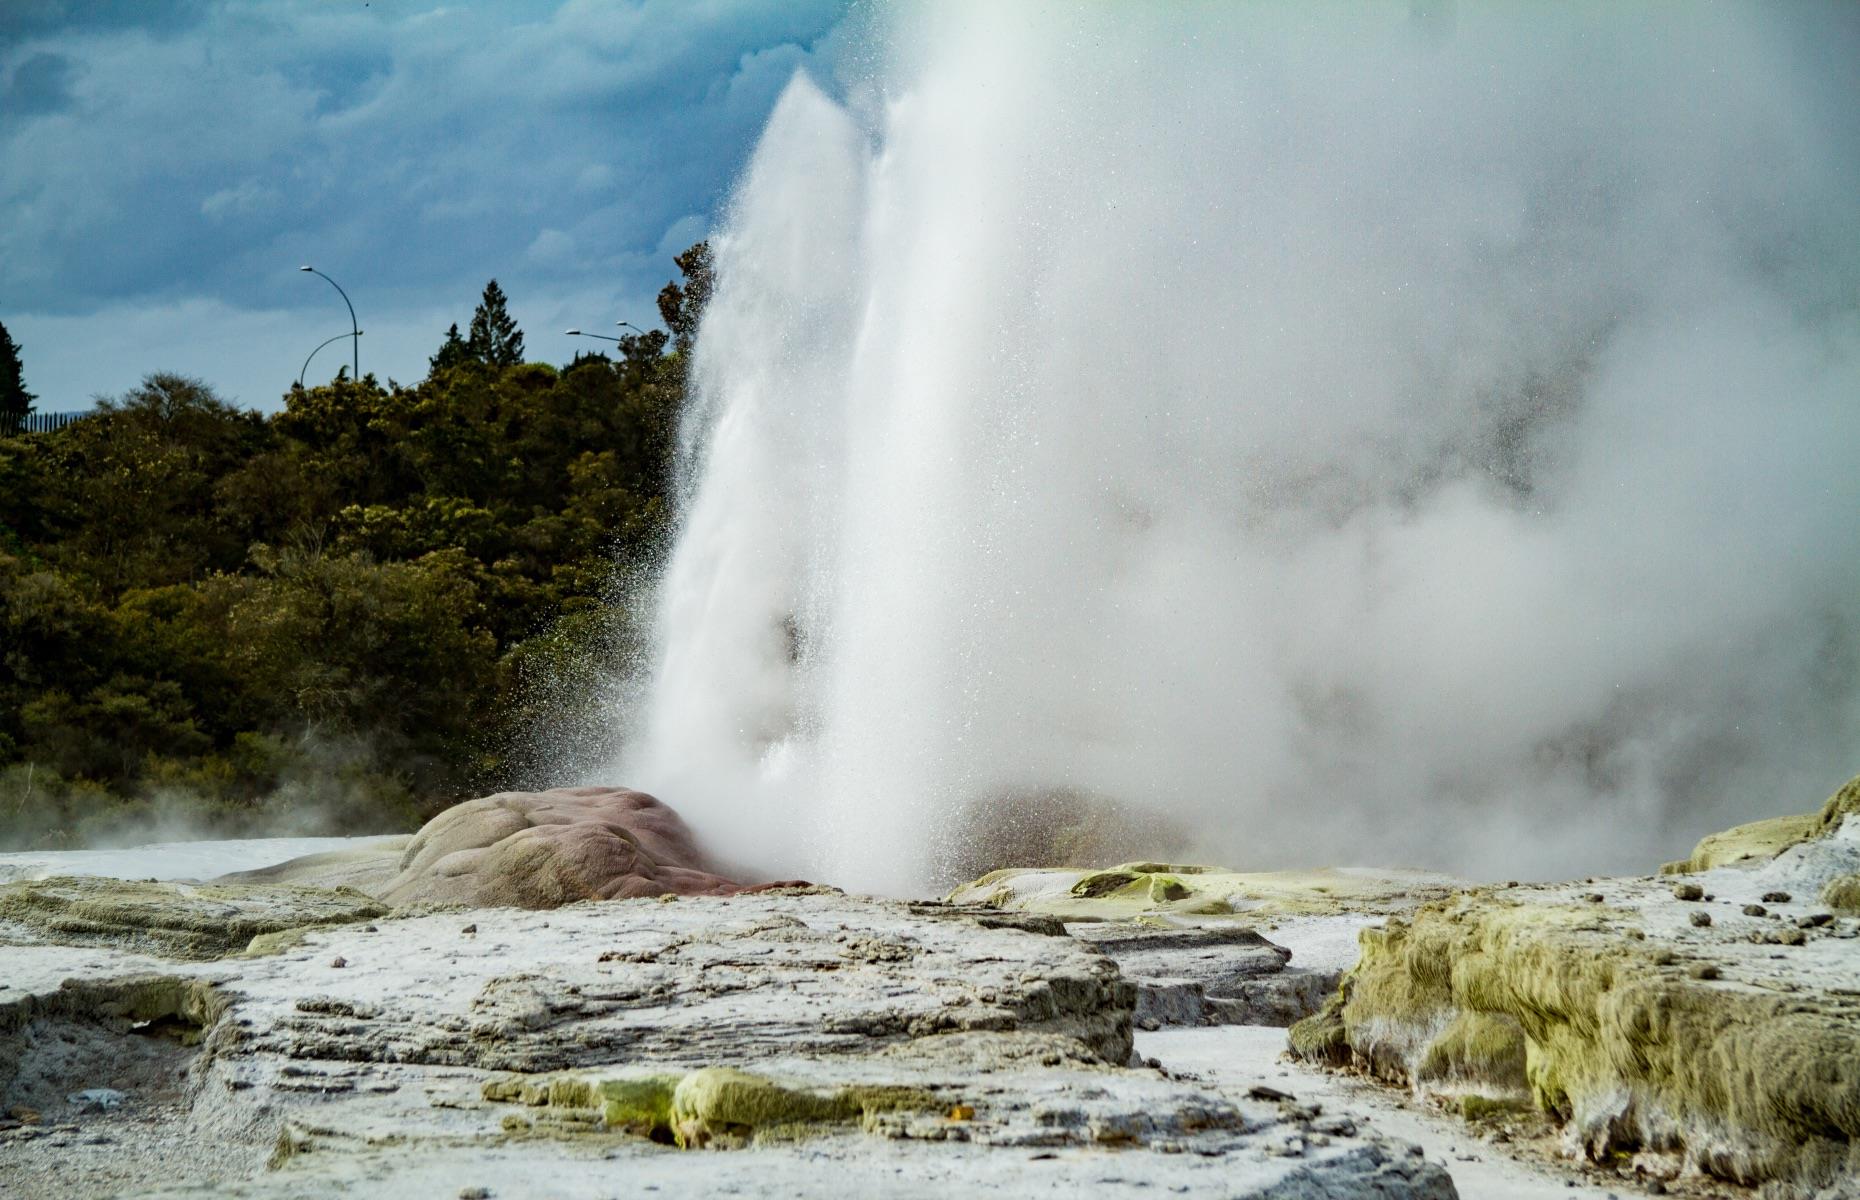 <p>The Rotorua area is jam-packed with geologic marvels, but Pohutu Geyser towers above the rest – suddenly erupting boiling water 98 feet (30m) into the air at least once every hour to the delight of onlookers. The largest active geyser in the southern hemisphere, Pohutu is part of Te Puia’s Te Whakarewarewa Geothermal Valley, full of bubbling pools and coursing elemental energy. Look out for the nearby Prince of Wales Feathers geyser, which always shoots water just before its bigger neighbour erupts.</p>